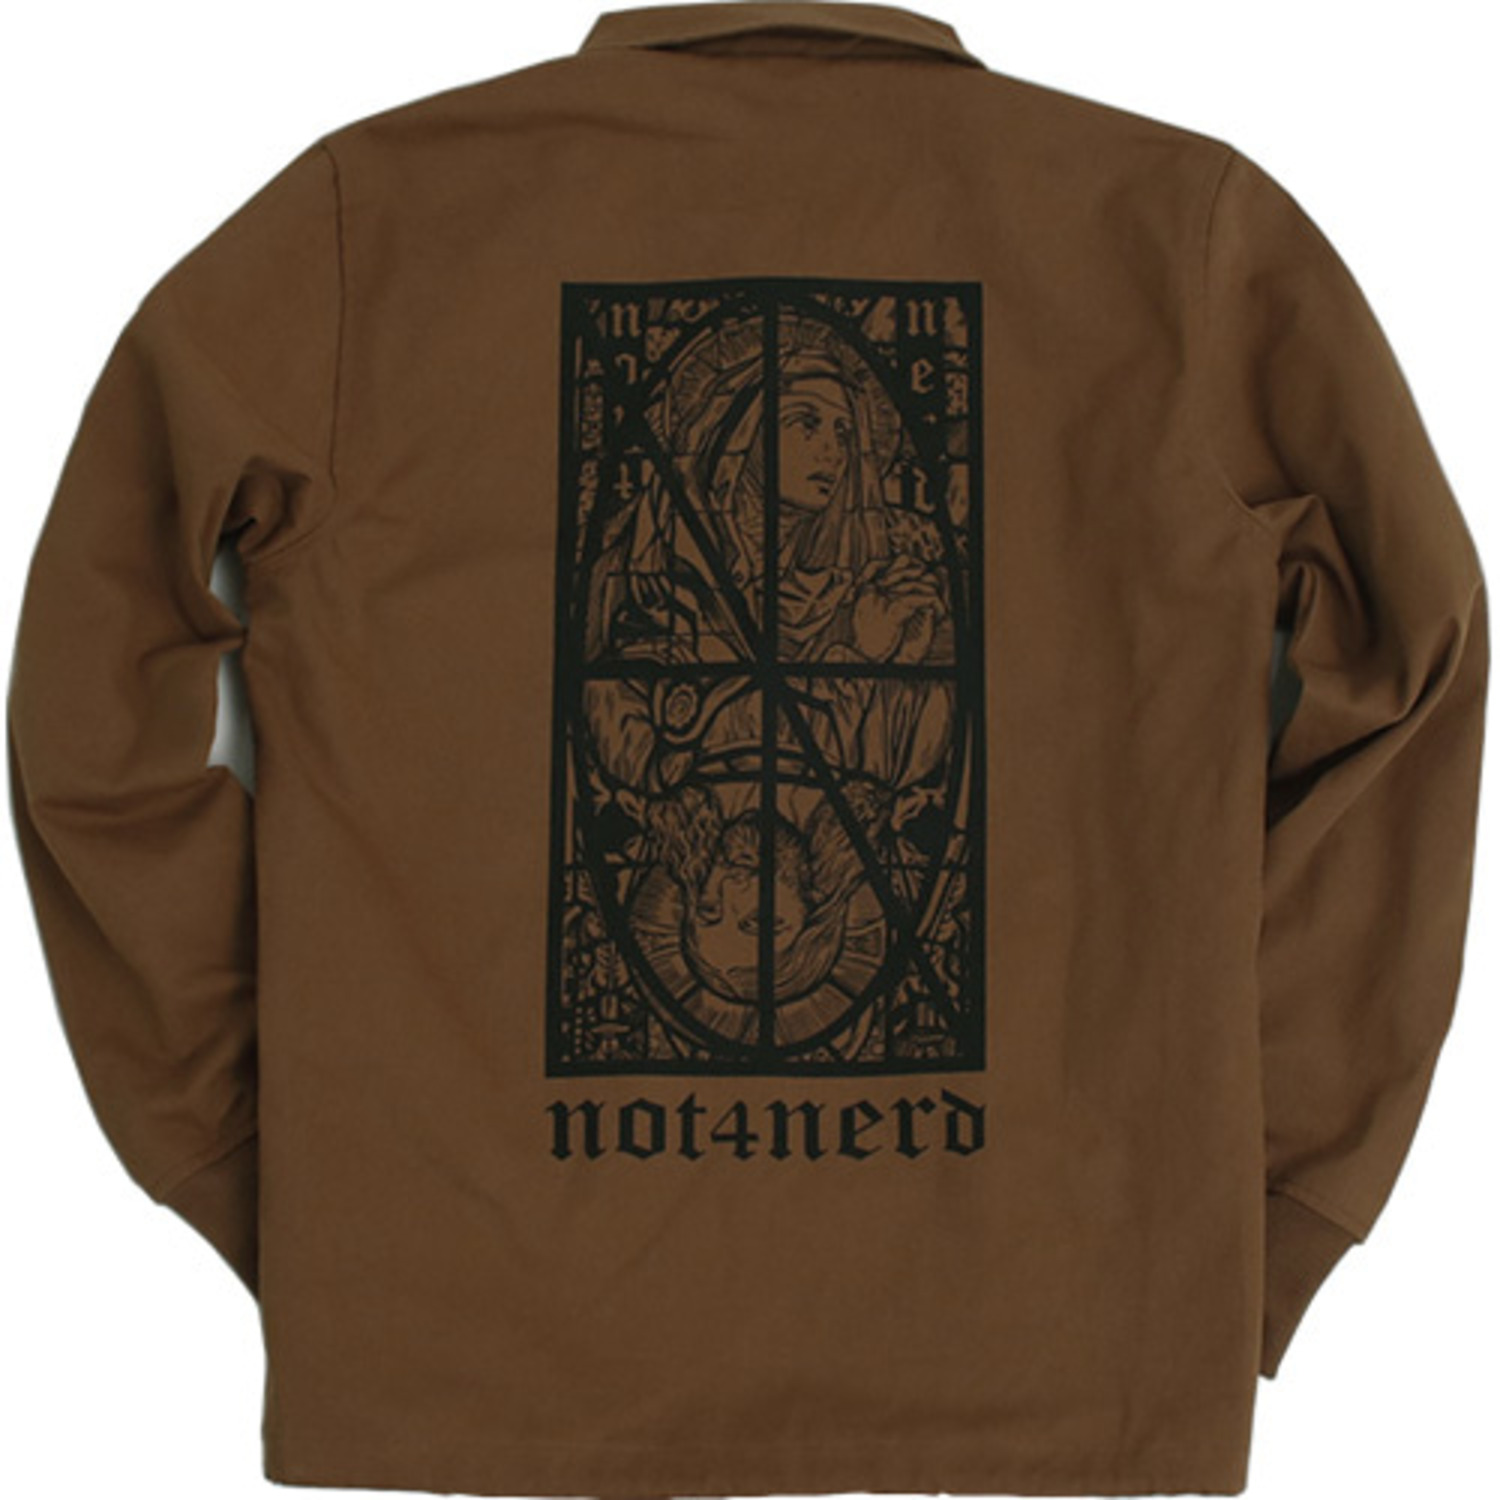 Two Faces Twill Coach Jacket [Brown],NOT4NERD